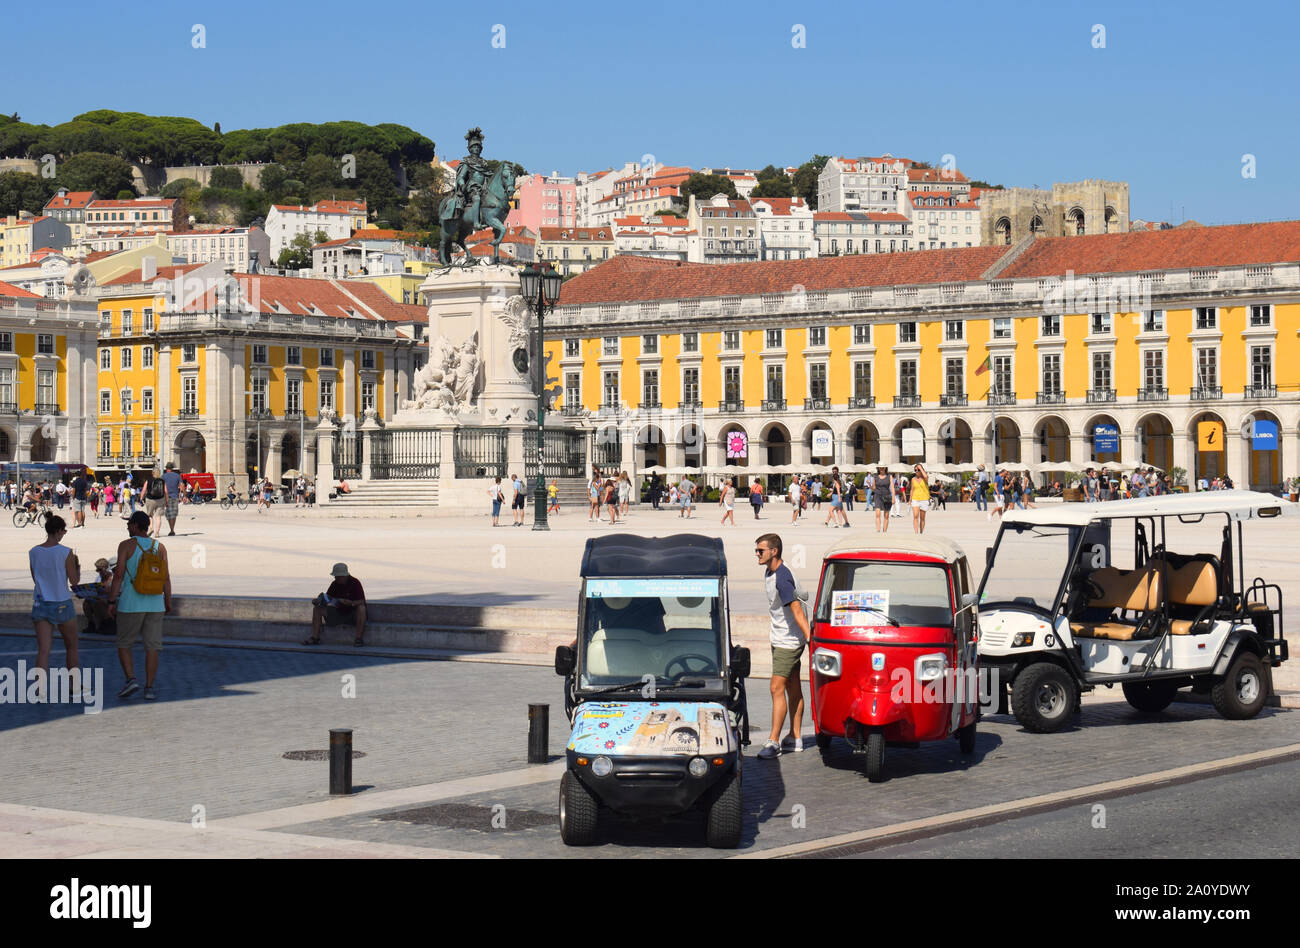 Tourist buggies and a tuk tuk parked on the Commercial Square, known locally as 'Praça do Comércio' or 'Terreiro do Paço', on a sunny August day. Stock Photo